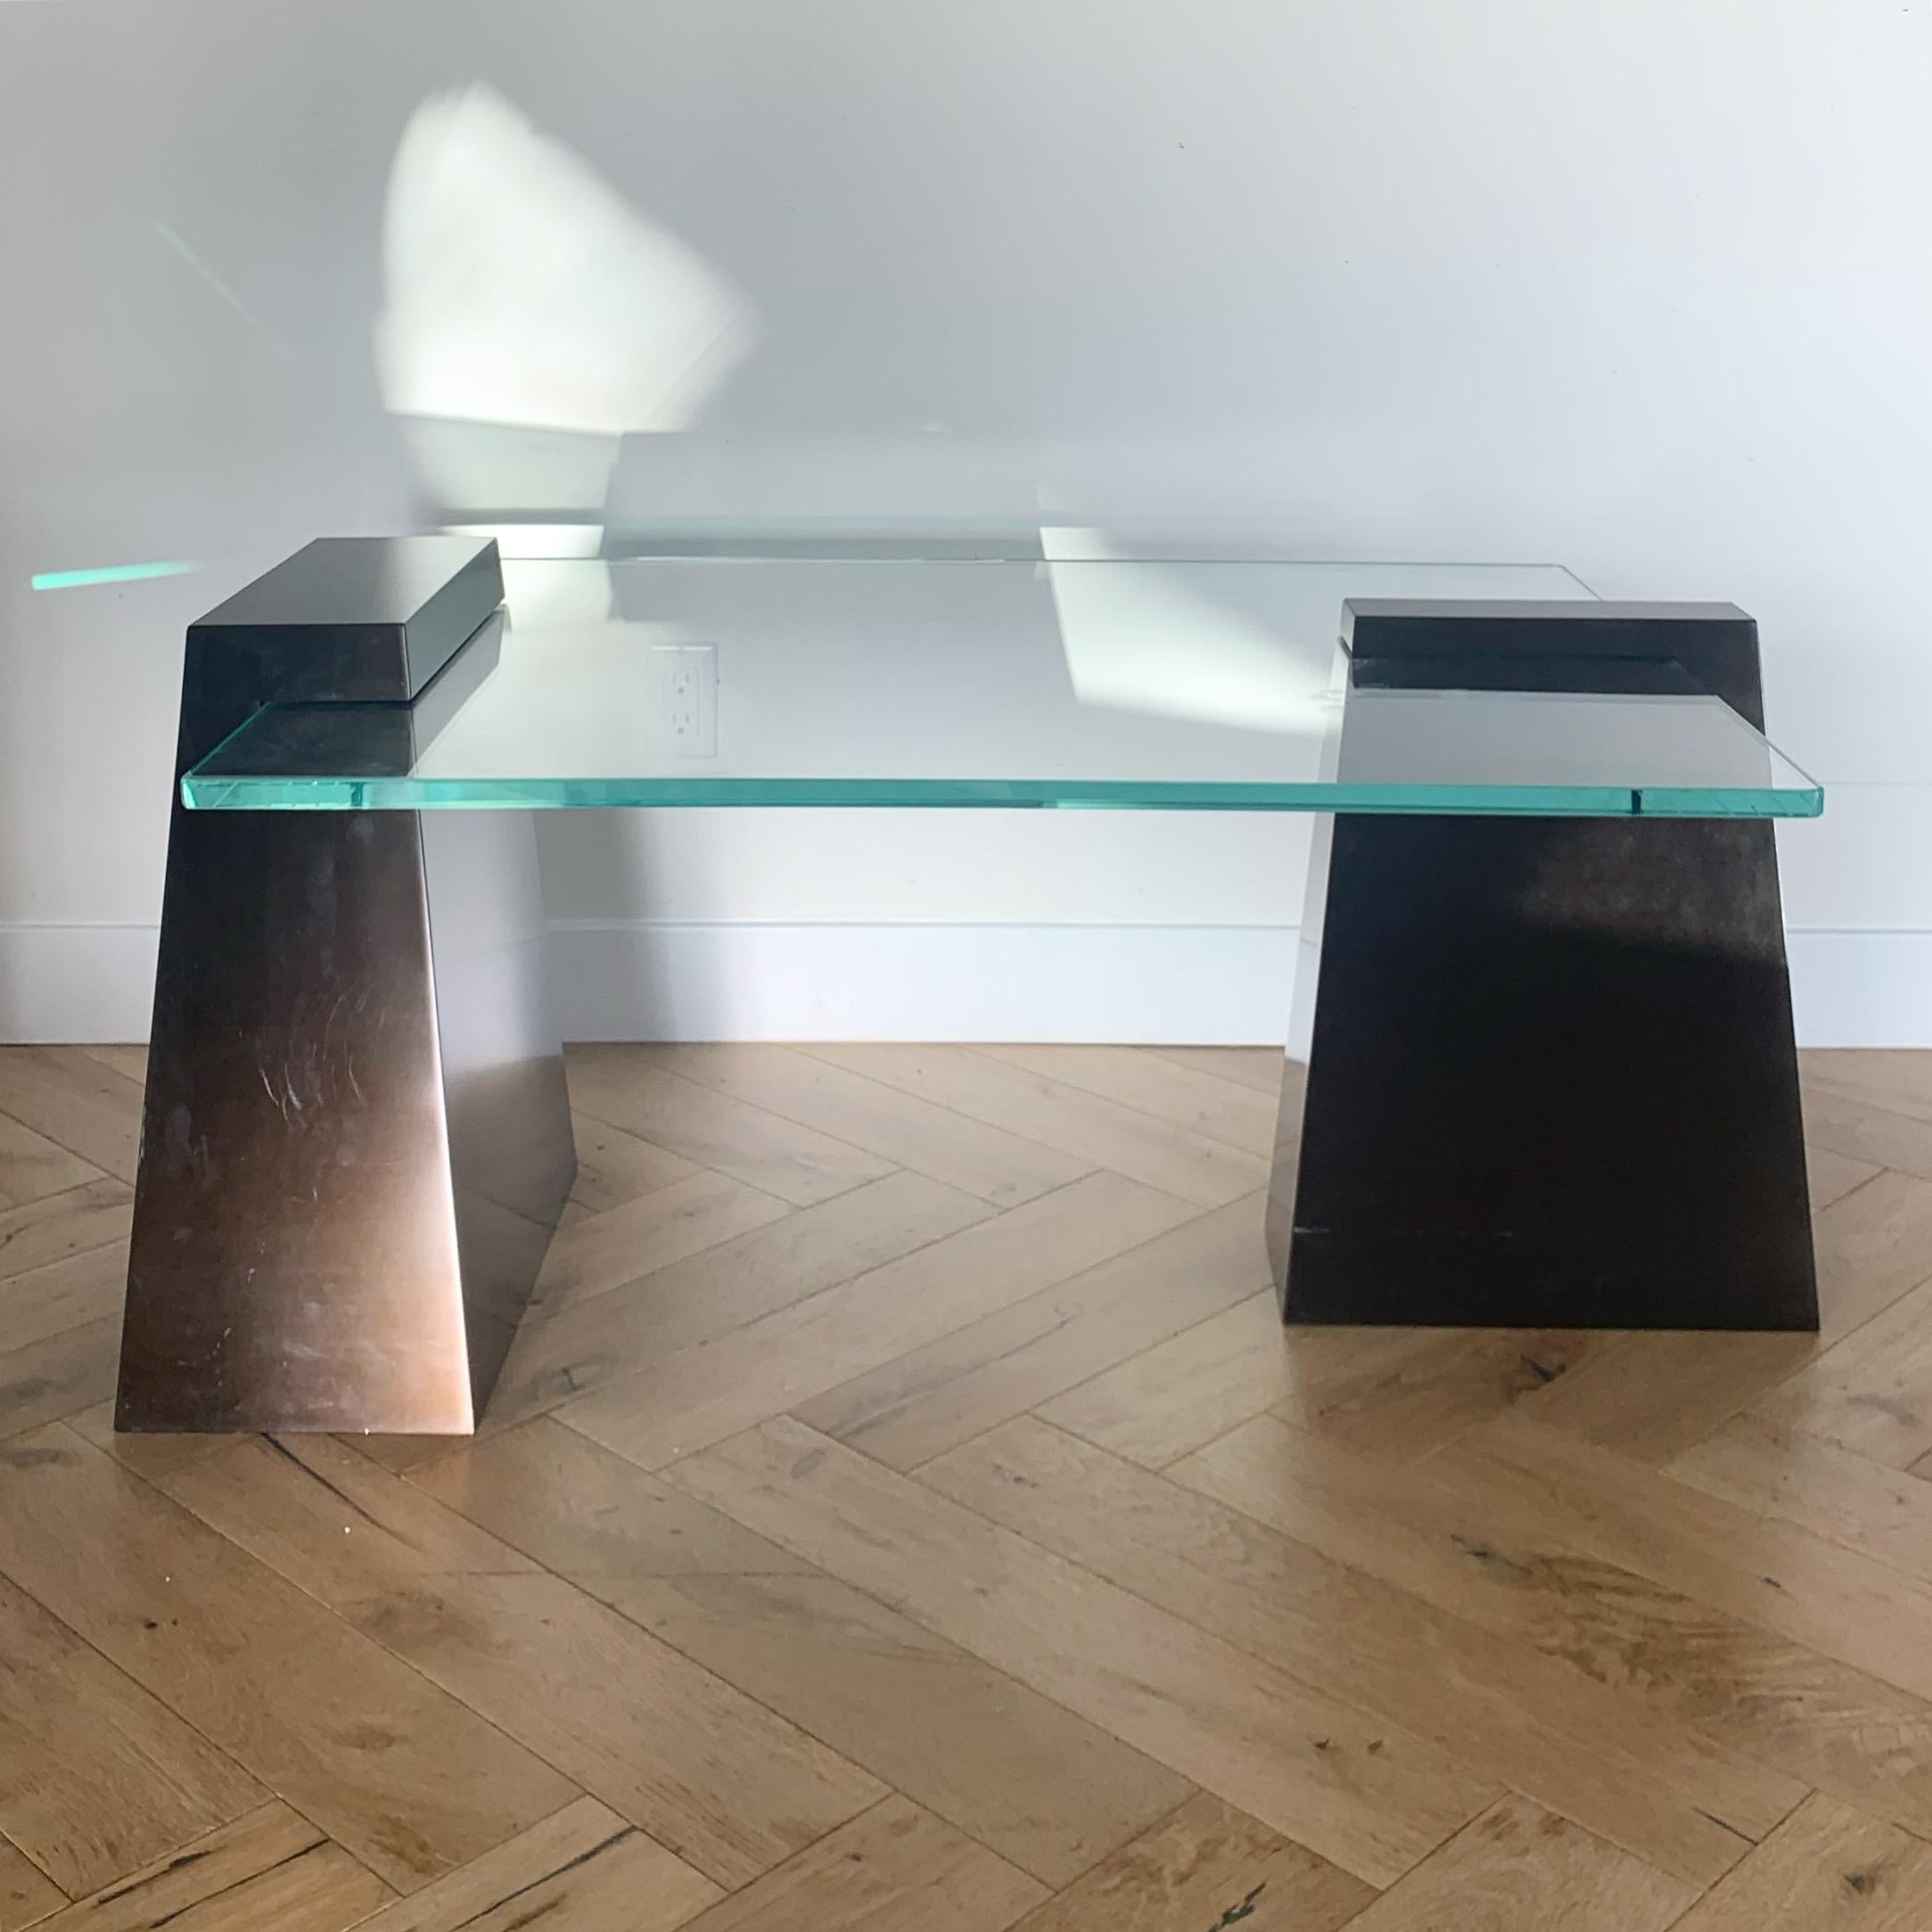 A vintage Will Stone or Karl Springer style modernist coffee table featuring two metal asymmetrical plinths that swallow a thick glass slab, late 20th century. The plinths are a sumptuous bronze, recalling postmodern industrialism. One is even